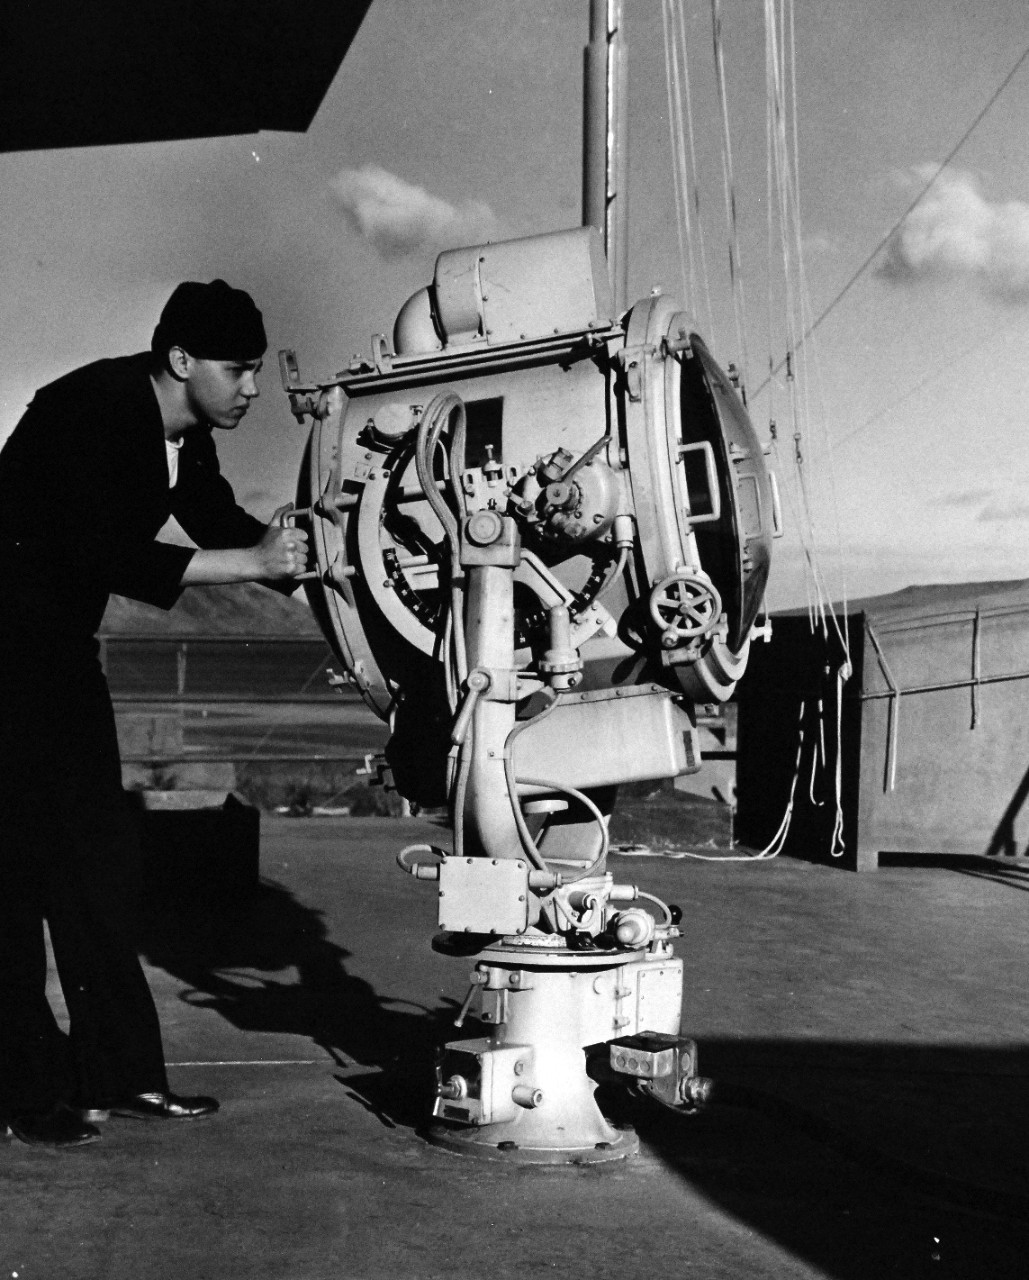 80-G-279767:   U.S. Naval Air Station, Kodiak, Alaska, 1943.     QM3/C A. Drank, USN, operating searchlights from atop control tower.  Photograph released October 29, 1943.  U.S. Navy Photograph now in the collections of the National Archives.  (2016/01/19).